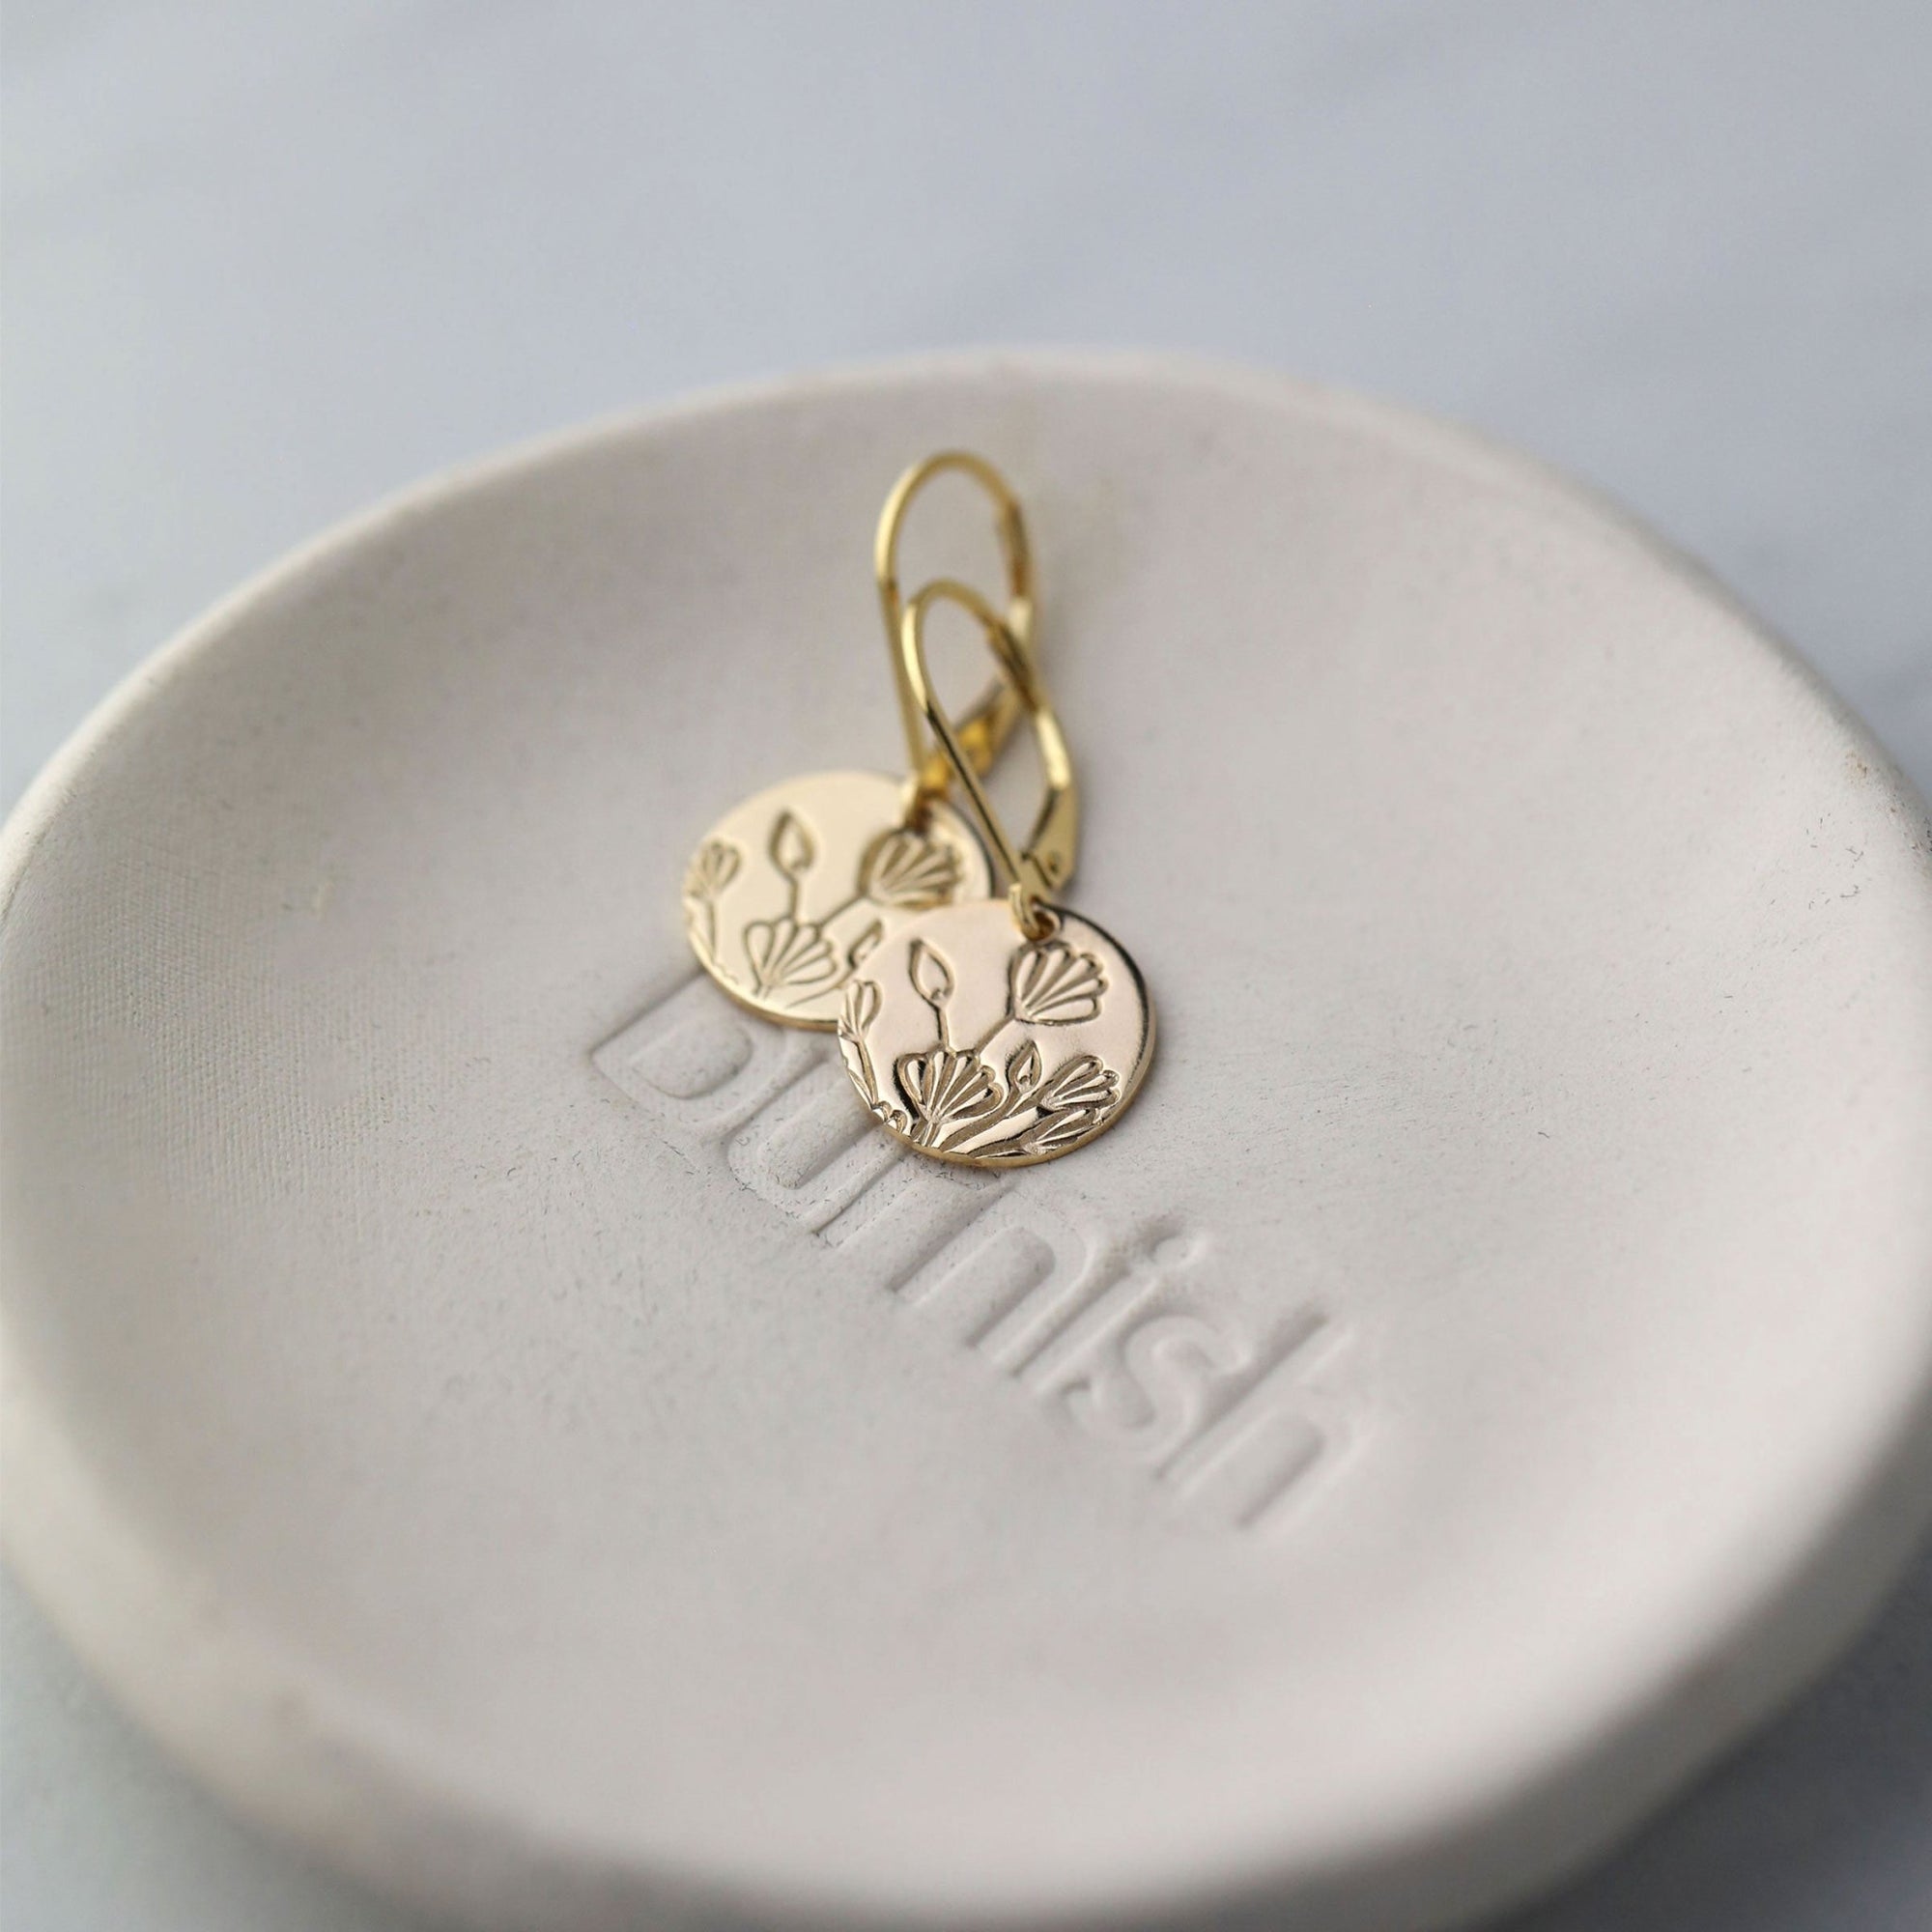 Gold Stamped Floral Disc Earrings handmade by Burnish